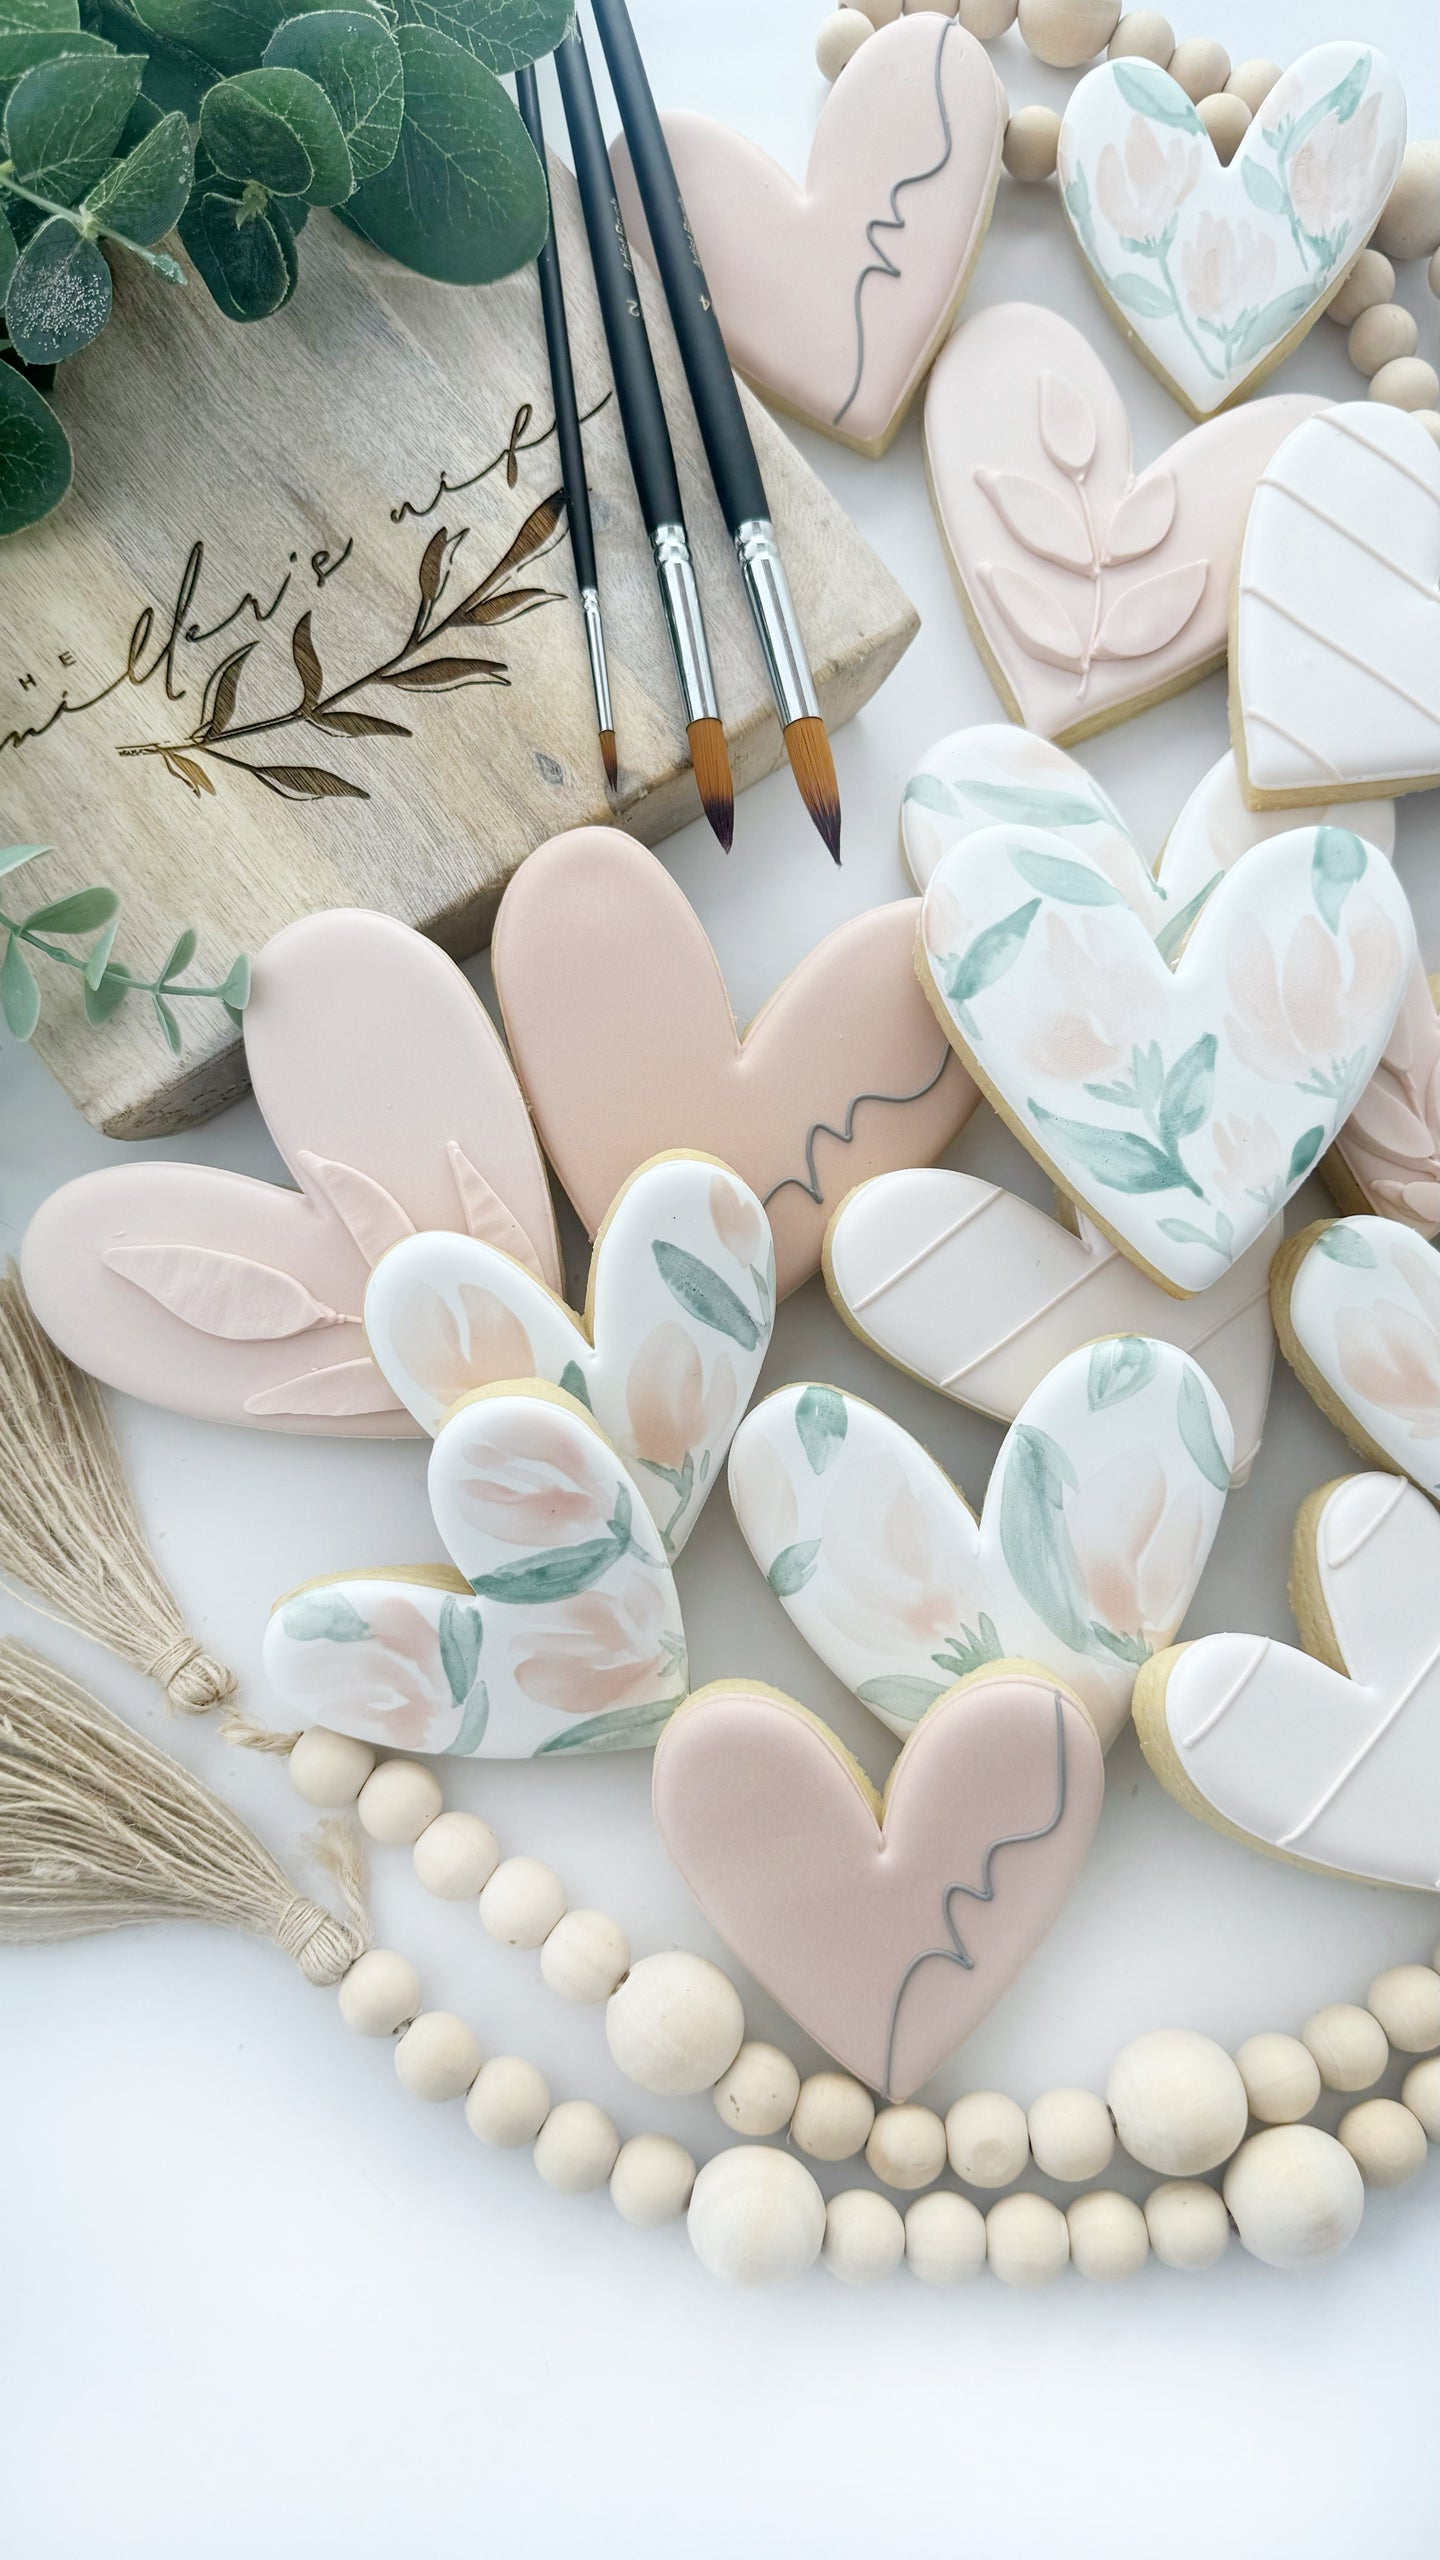 Online Cookie Decorating Classes and STL Files for 3D Printing